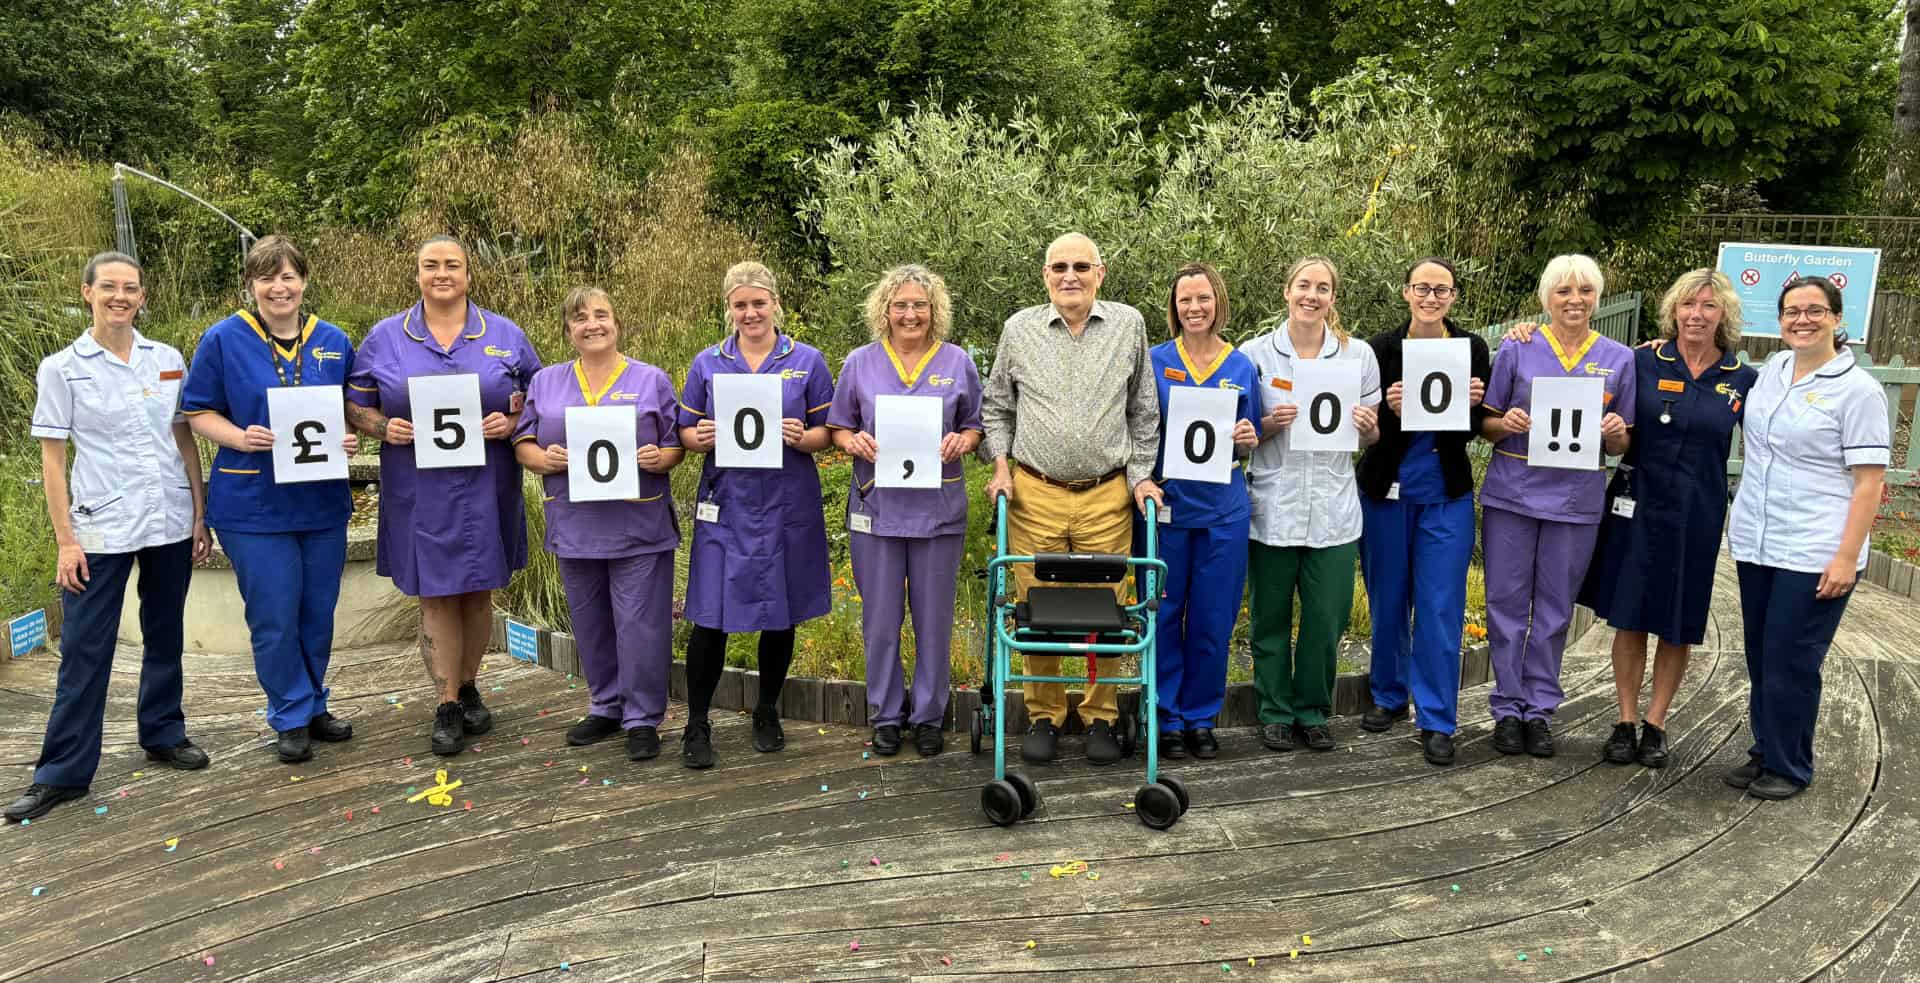 Members of mountbatten staff holding cards showing Walk the Wight fundraising Milestone